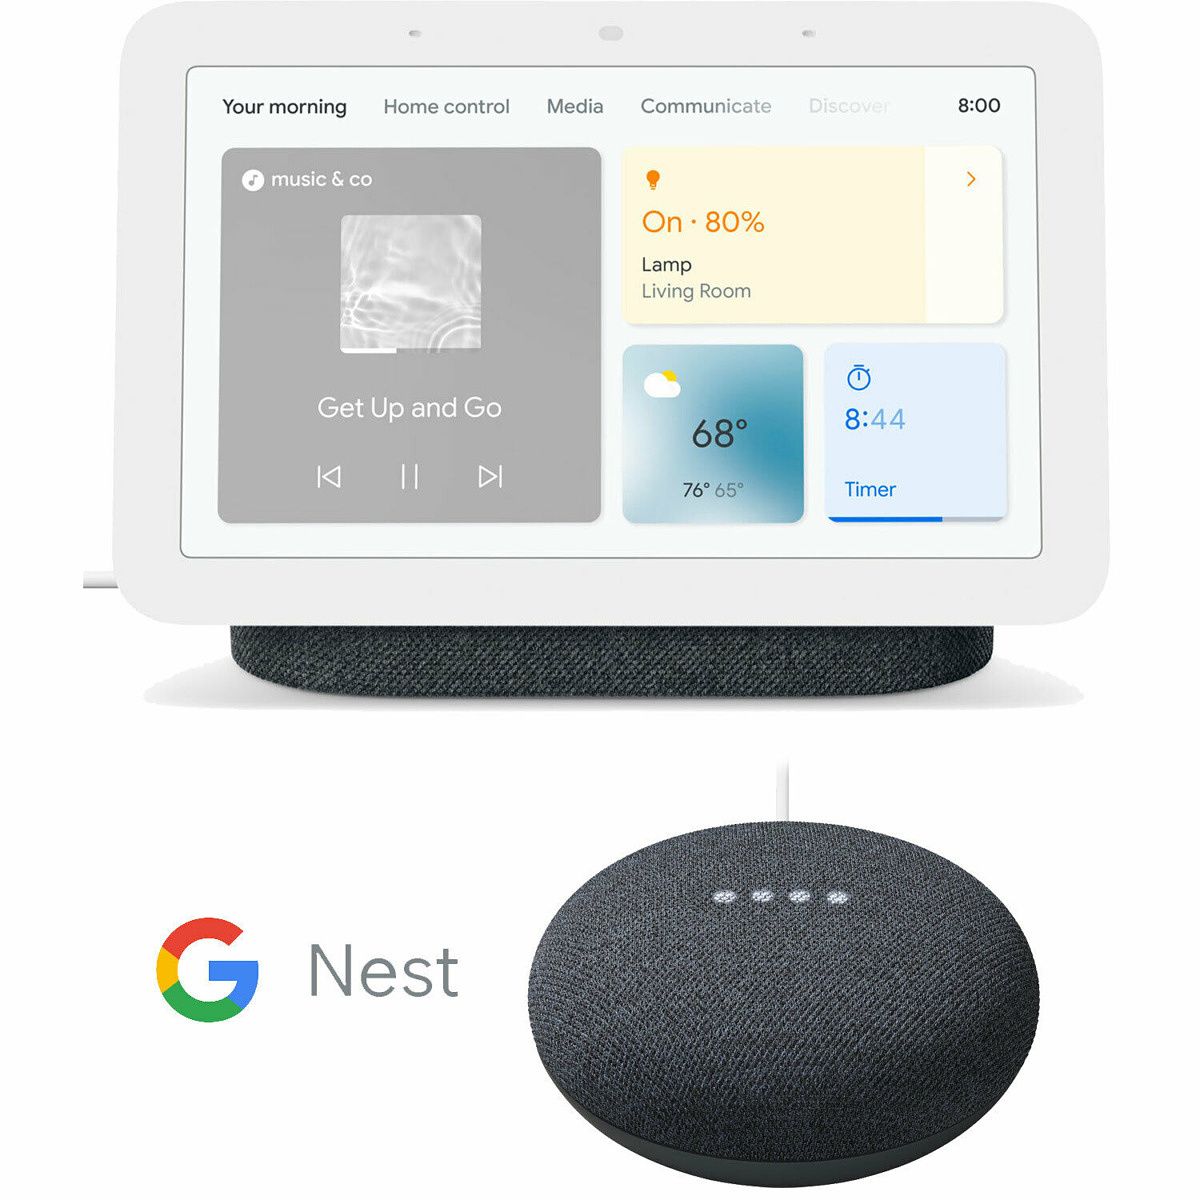 This bundle package from Google's official eBay store gets you two smart speakers.